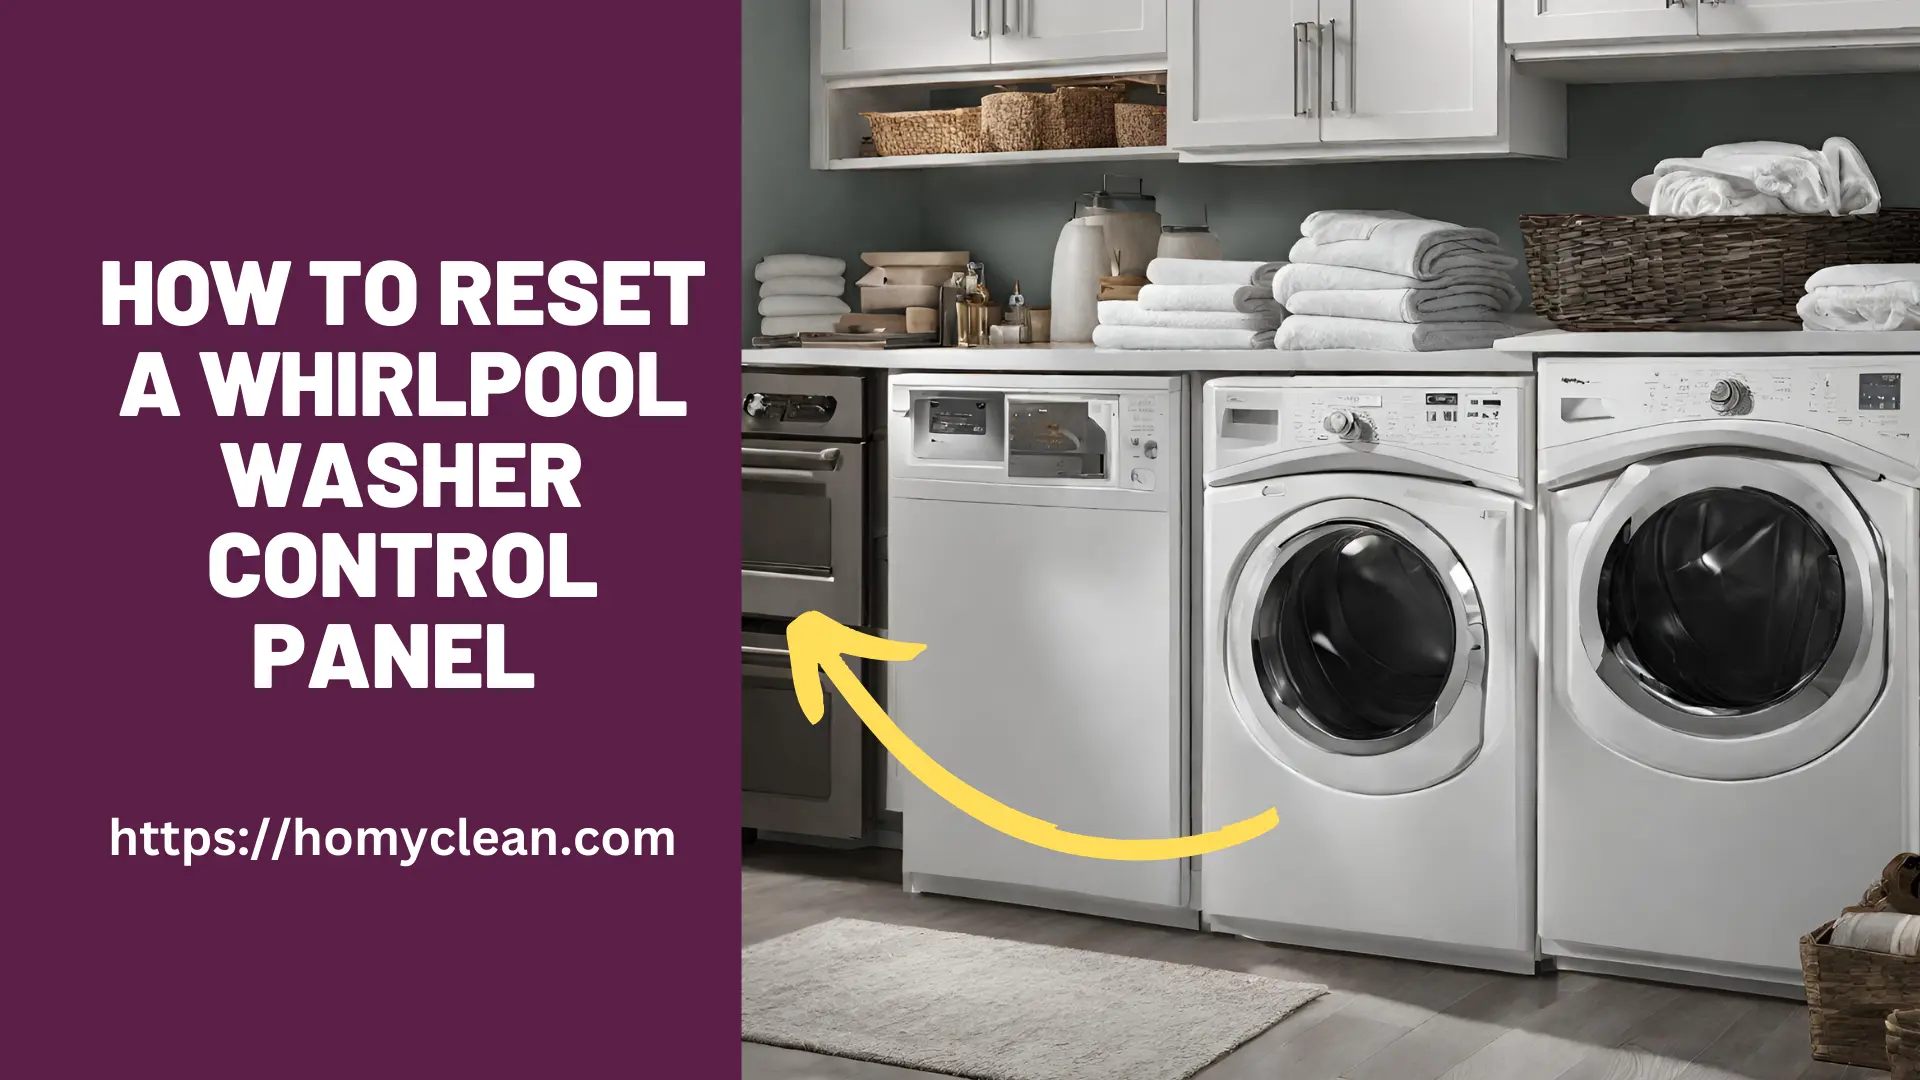 How to Reset a Whirlpool Washer Control Panel – Quick and Easy Guide